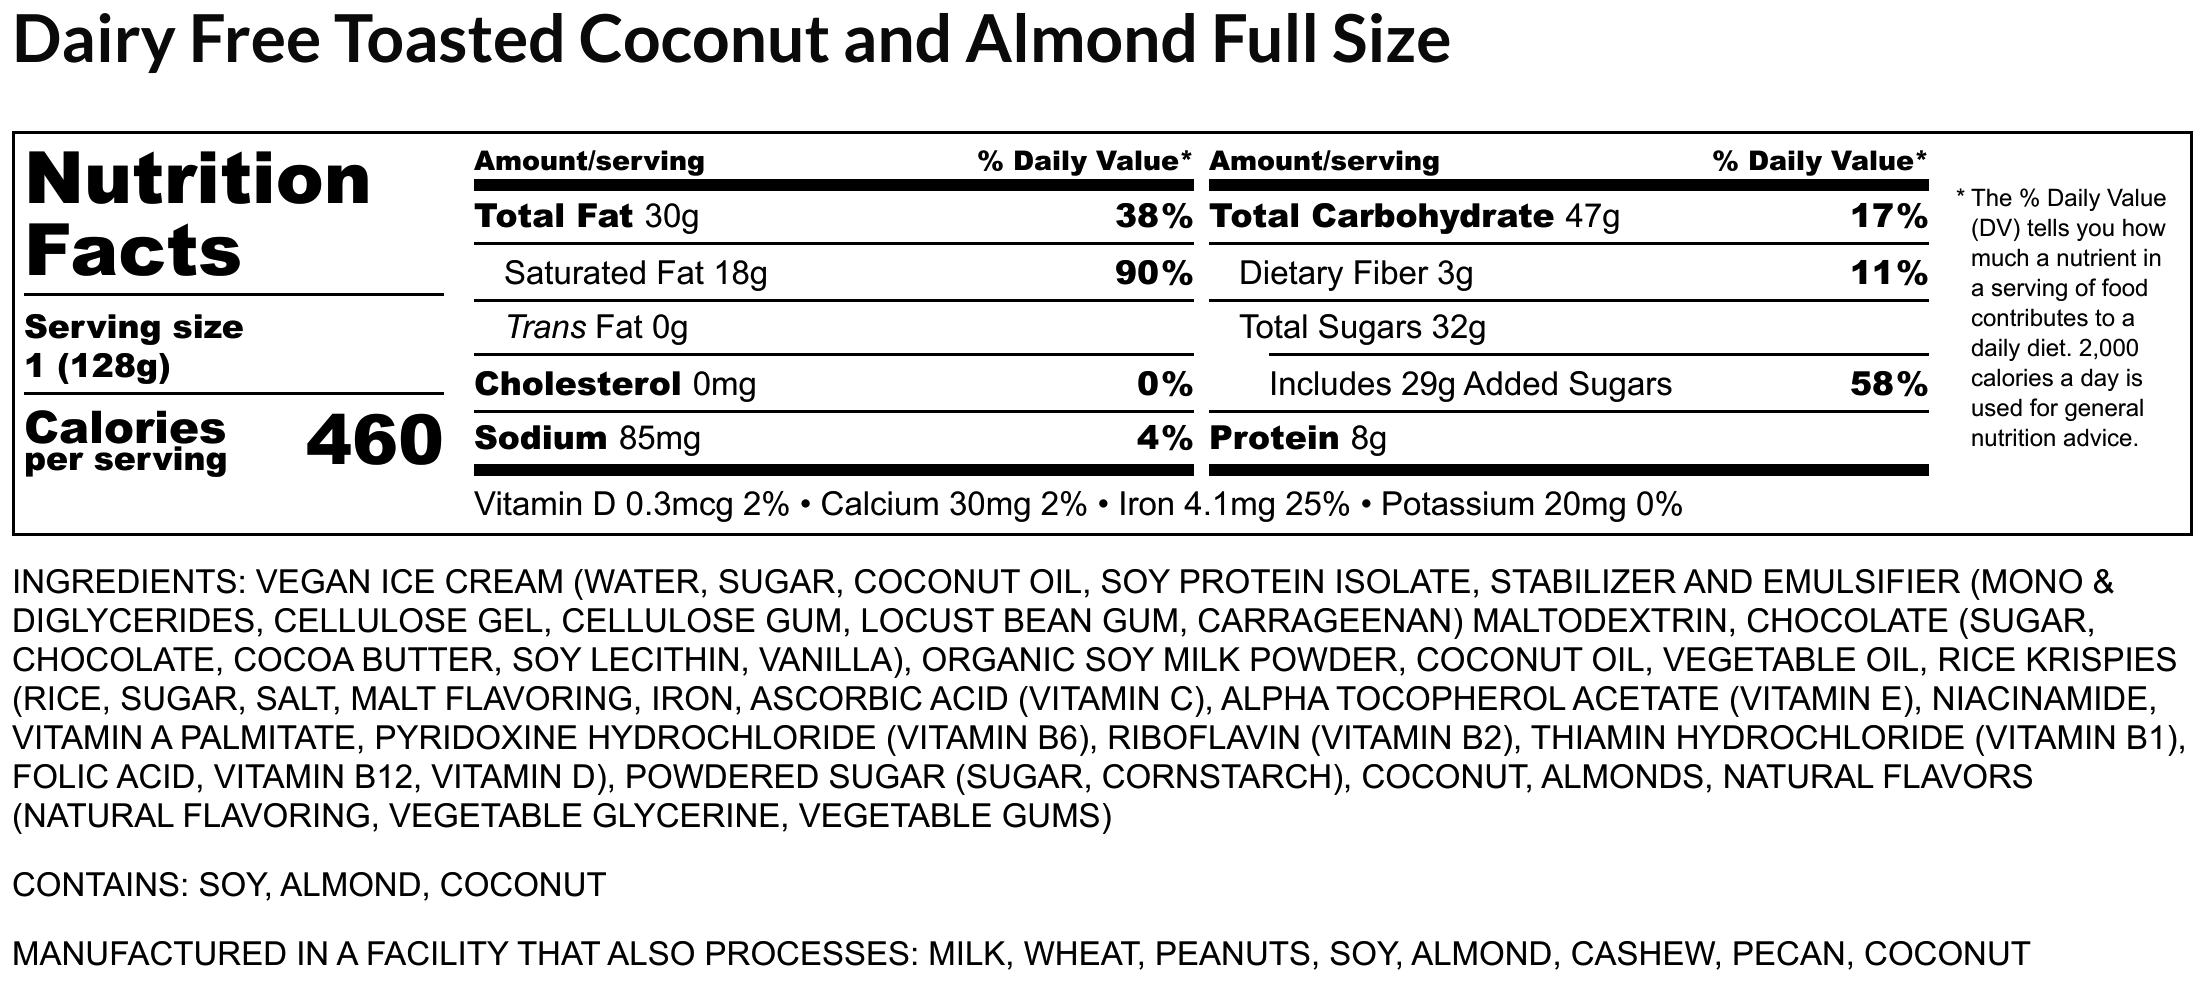 Dairy Free Toasted Coconut and Almond Full Size